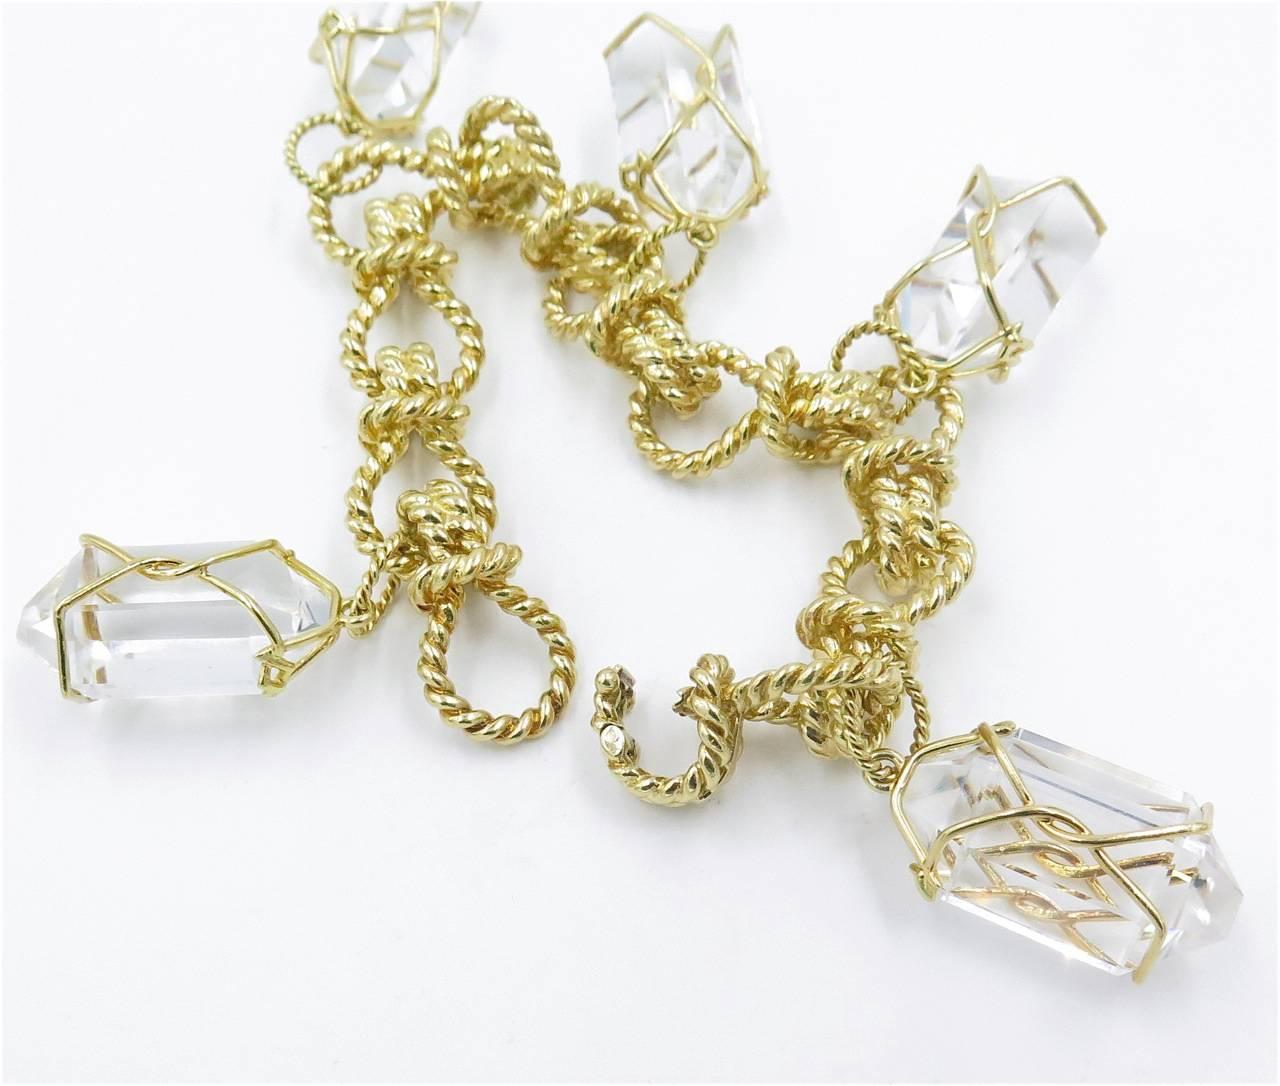 An 18 karat yellow gold and rock crystal Herkimer bracelet, Verdura. Designed as a ropework link bracelet, suspending five (5) fancy-cut rock crystal pendants, each wrapped in gold wire. Length of bracelet is 8 inches. Gross weight is approximately